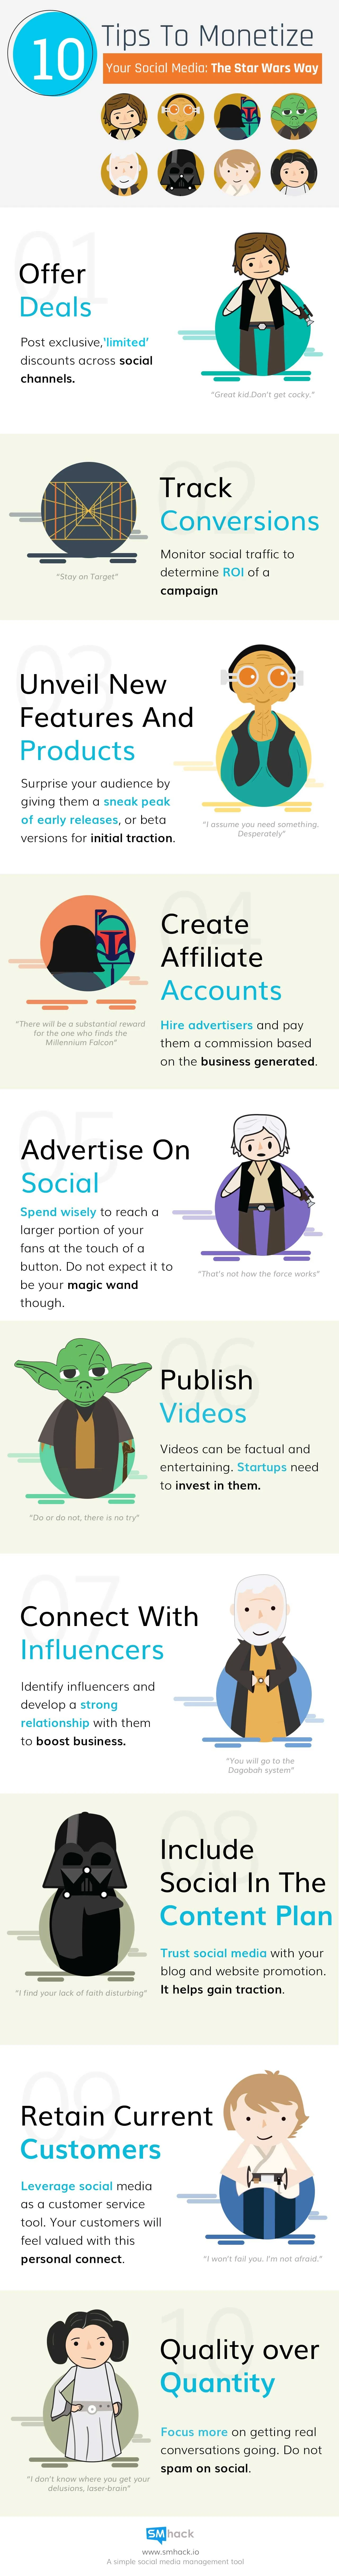  10 Tips to Monetize Your Social Media: The Star Wars Way - #infographic